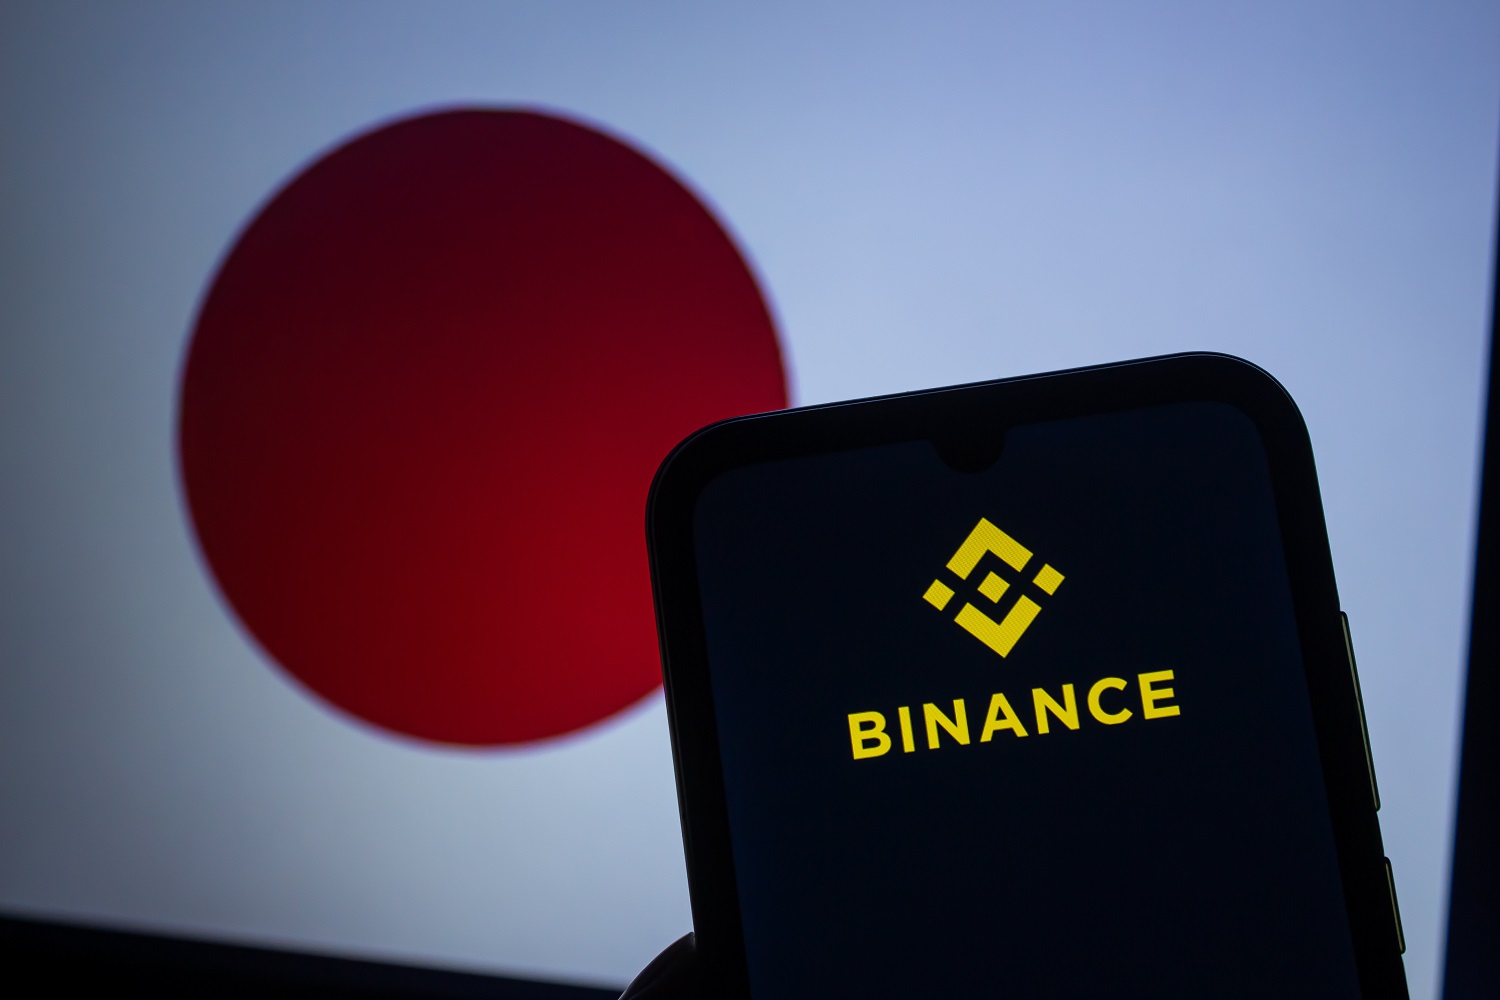 The Binance logo displayed on a smartphone screen against the backdrop of the flag of Japan.